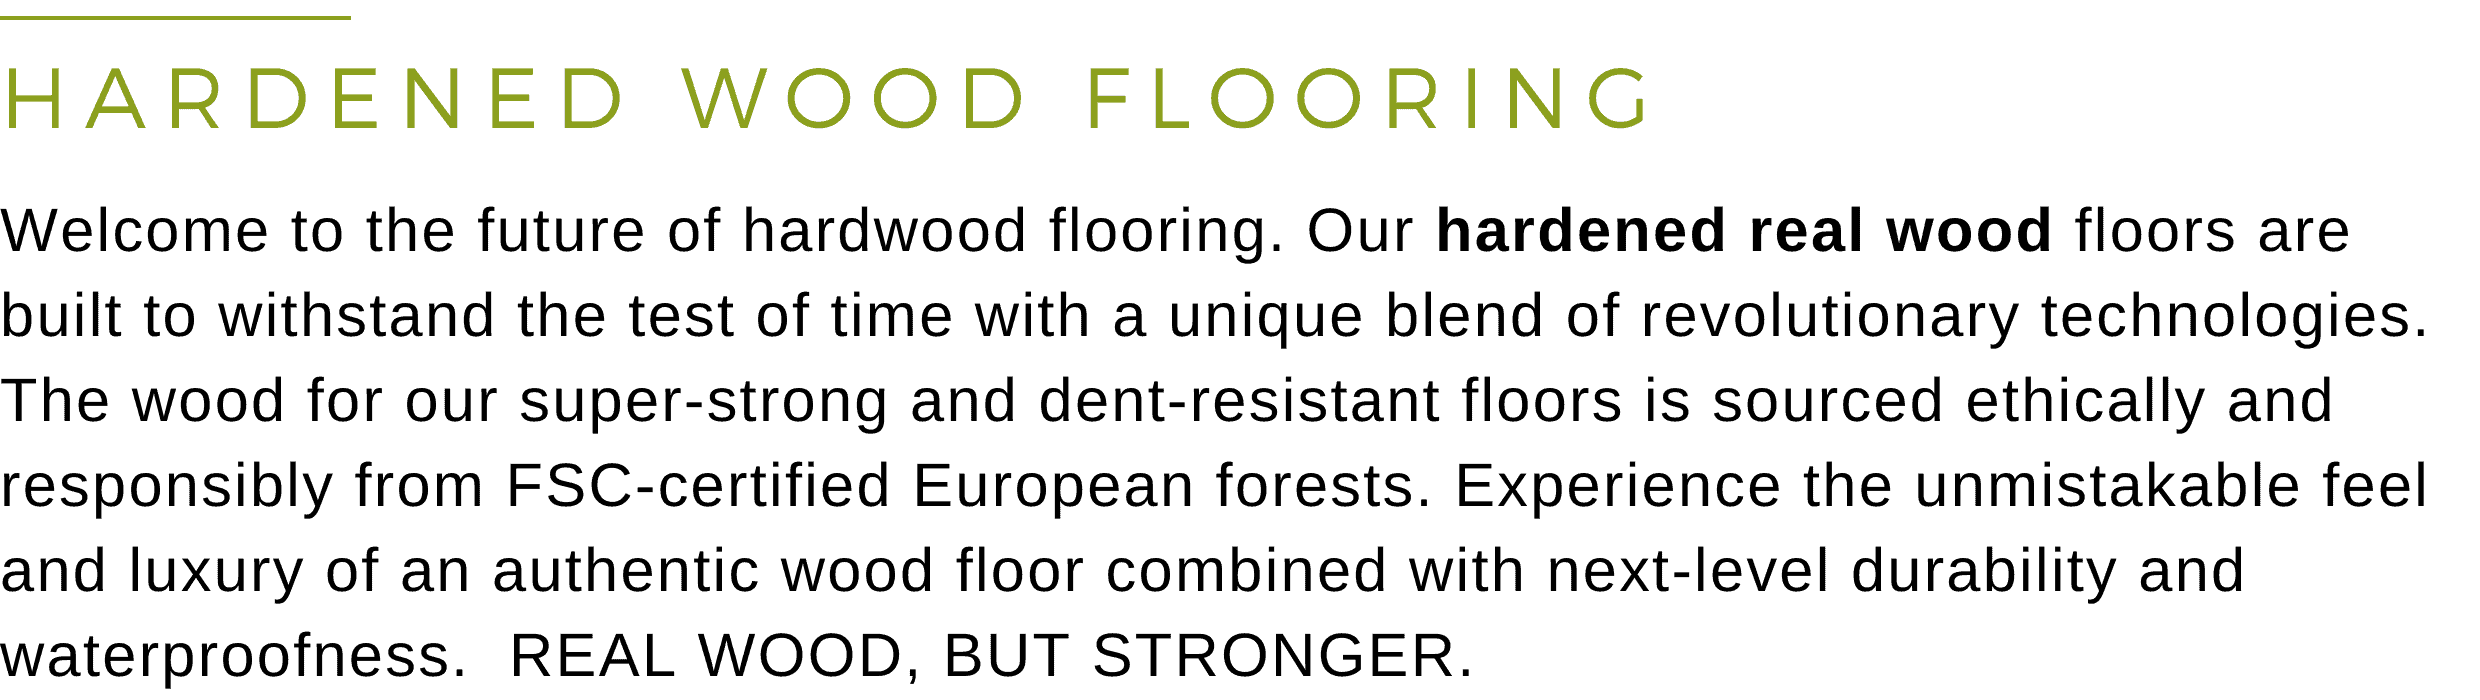 HARDENED WOOD FLOORING - Welcome to the future of hardwood flooring. Our hardened real wood floors are built to withstand the test of time with a unique blend of revolutionary technologies. The wood for our super-strong and dent-resistant floors is sourced ethically and responsibly from FSC-certified European forests. Experience the unmistakable feel and luxury of an authentic wood floor combined with next-level durability and waterproofness.  REAL WOOD, BUT STRONGER.